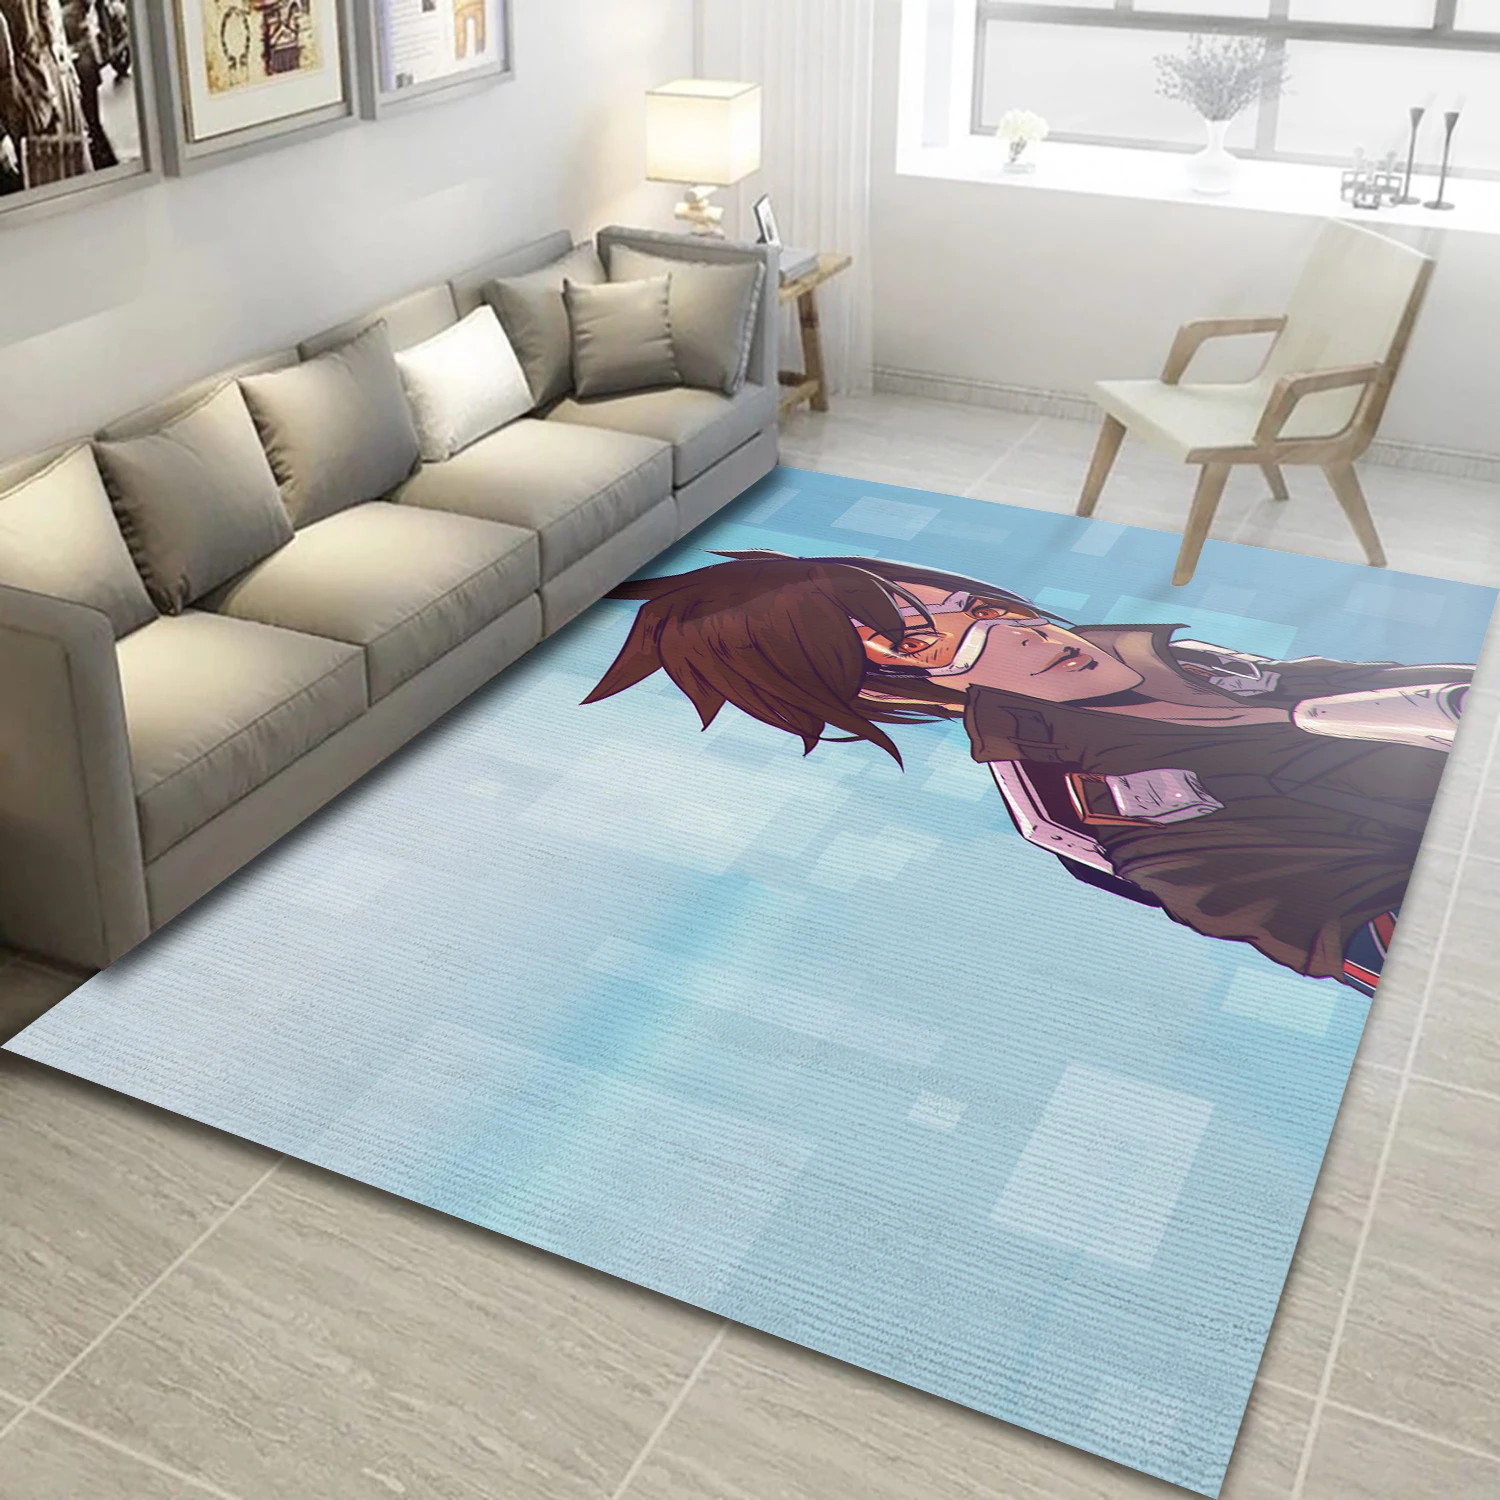 Tracer Overwatch Video Game Reangle Rug, Living Room Rug - Home Decor Floor Decor - Indoor Outdoor Rugs 2